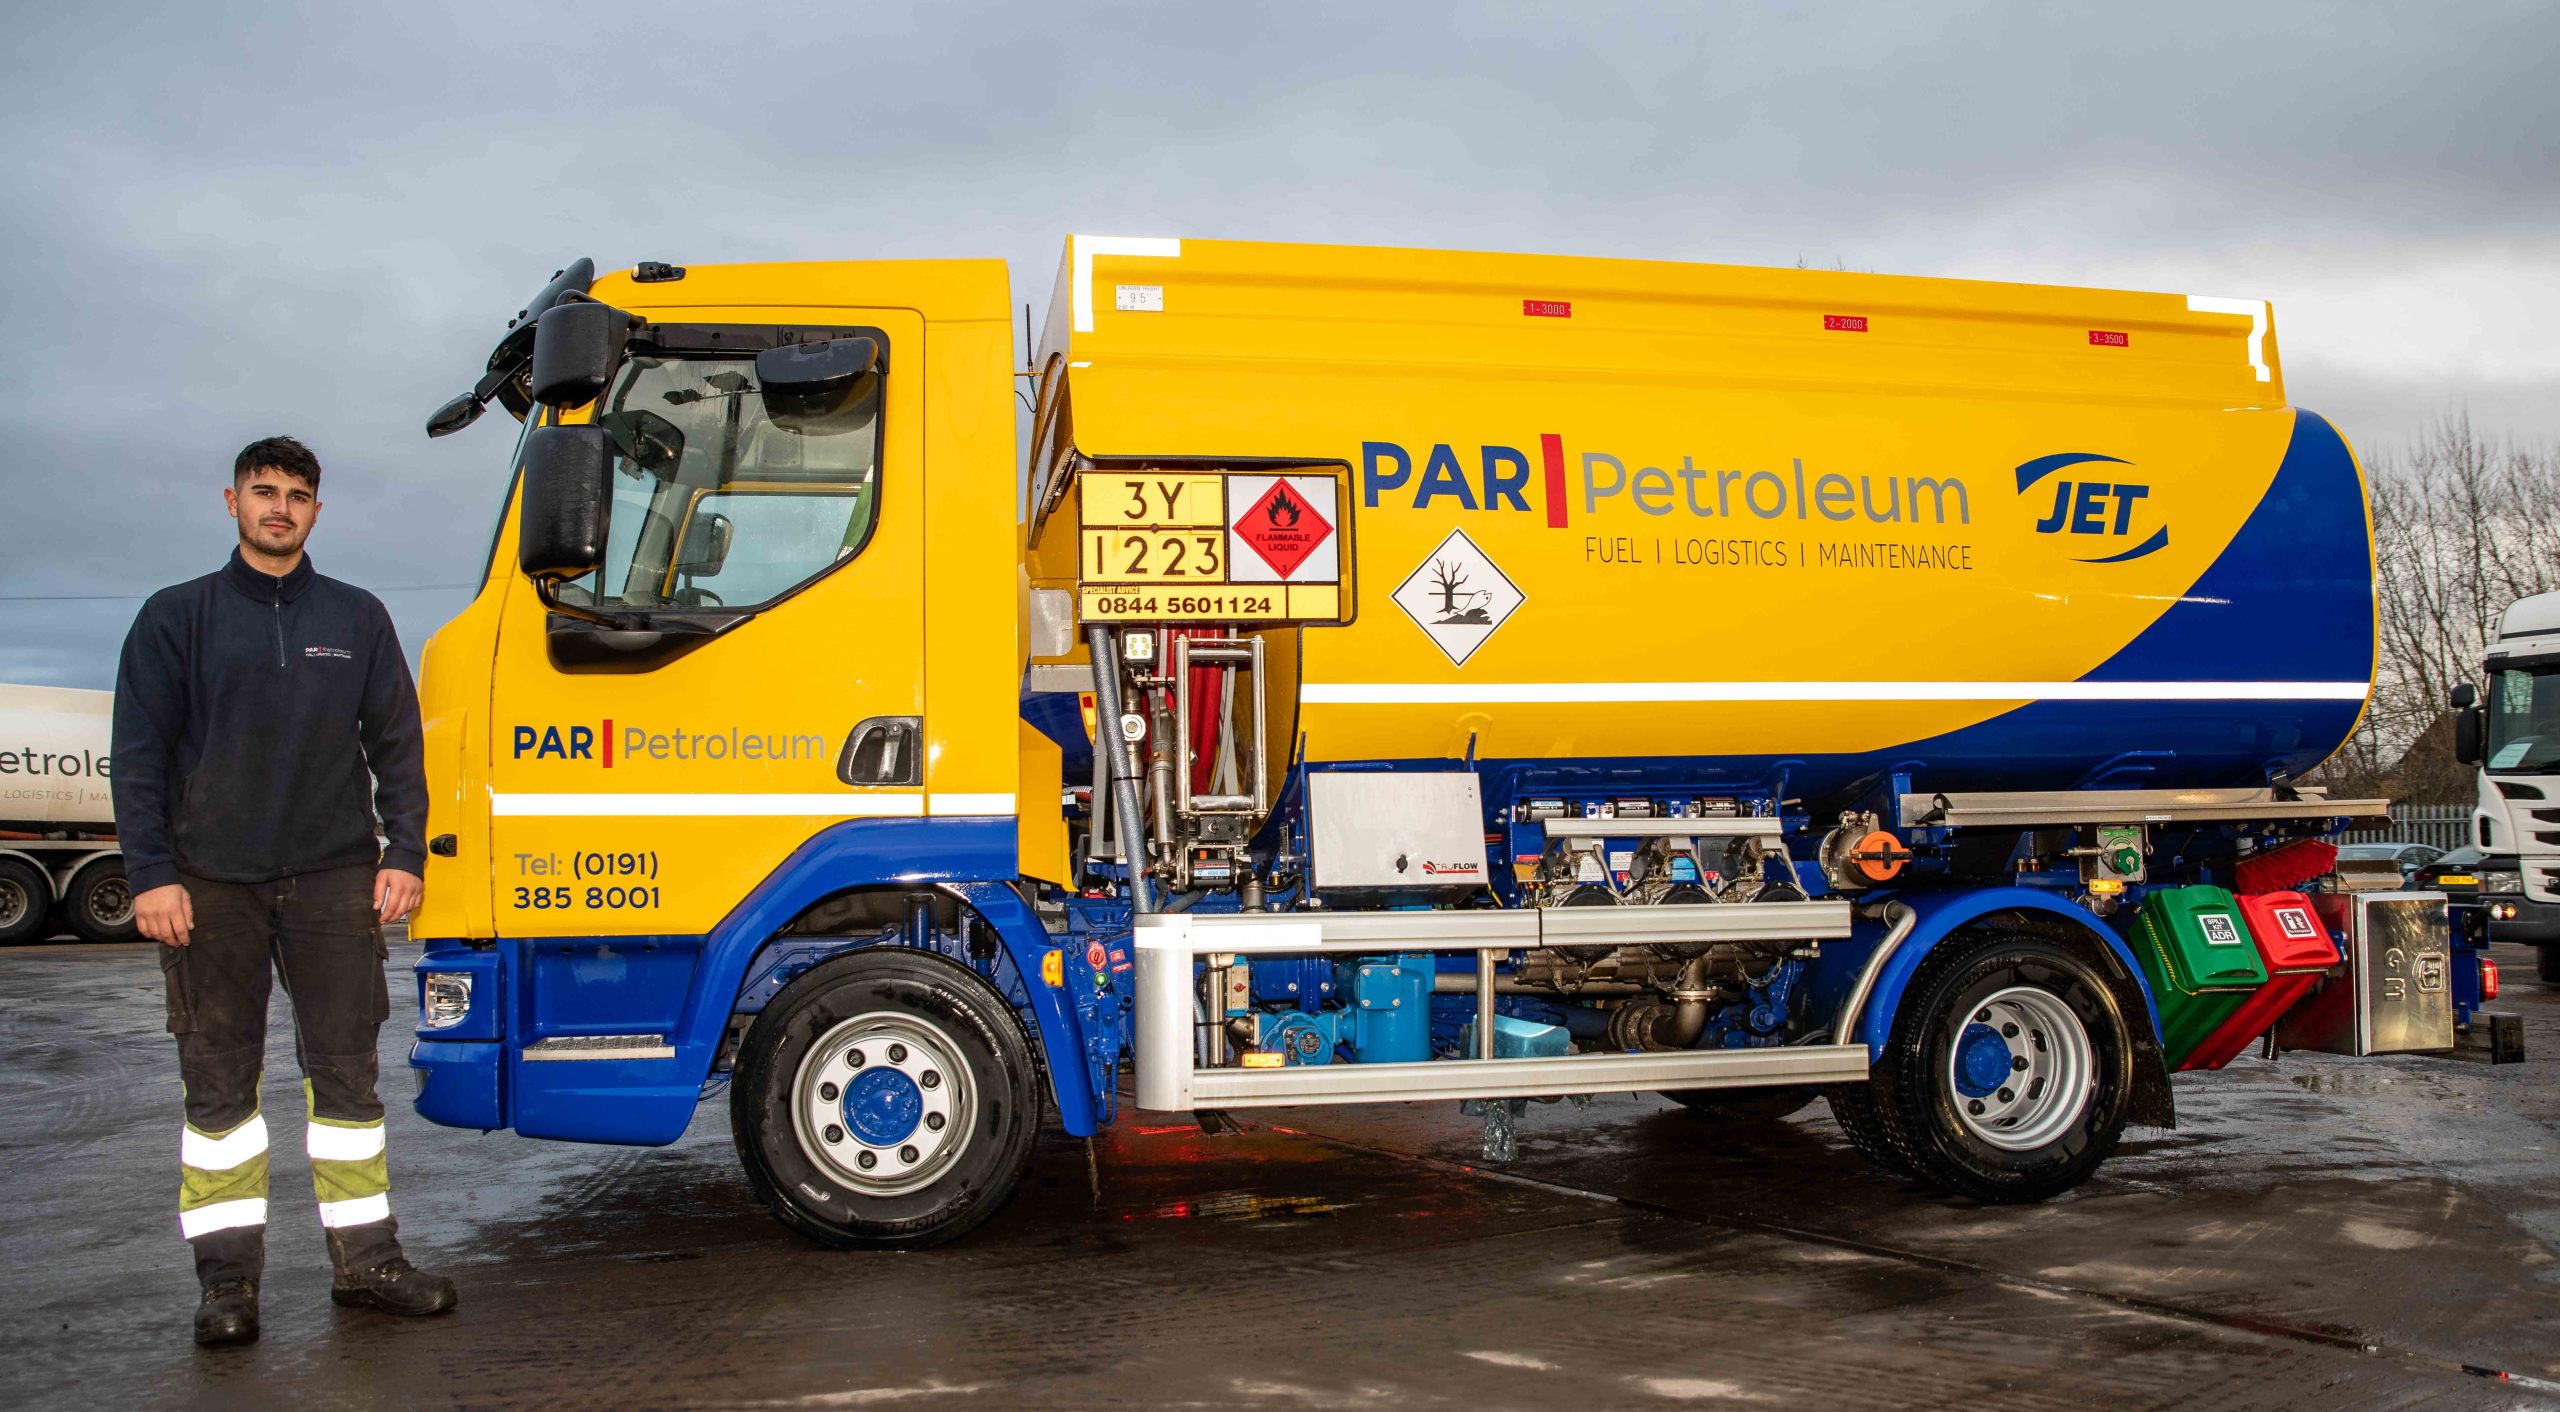 A man stands next to a large yellow and blue vehicle with the words Par Petroleum along the side